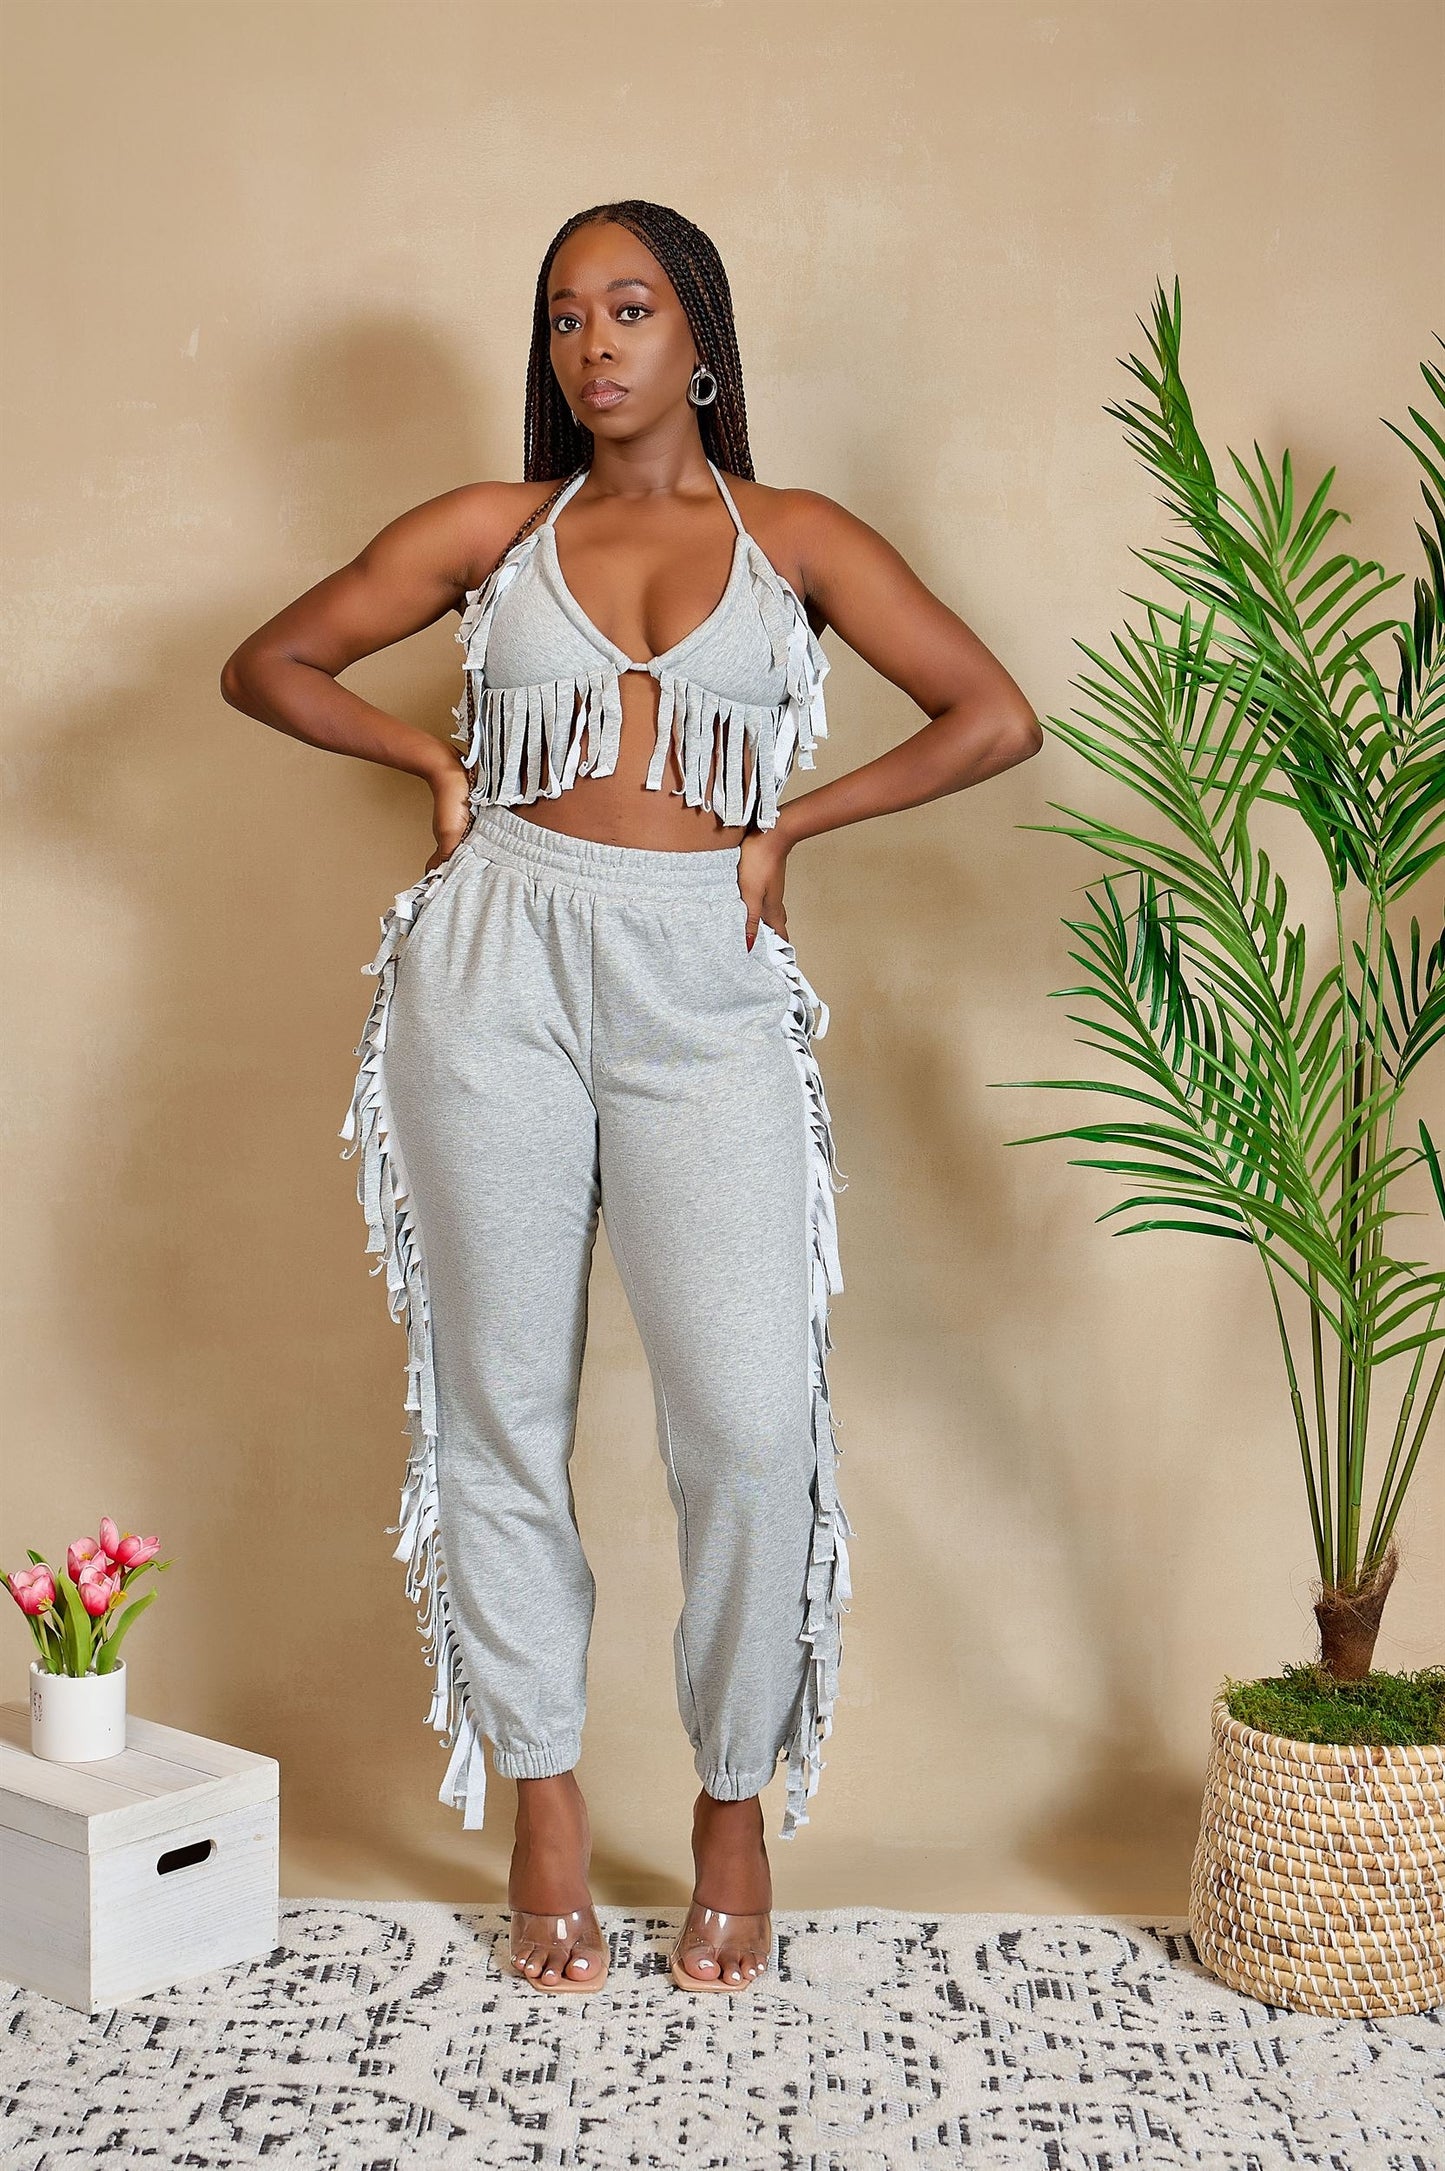 Just Get on With It Heather Grey Fringe Set